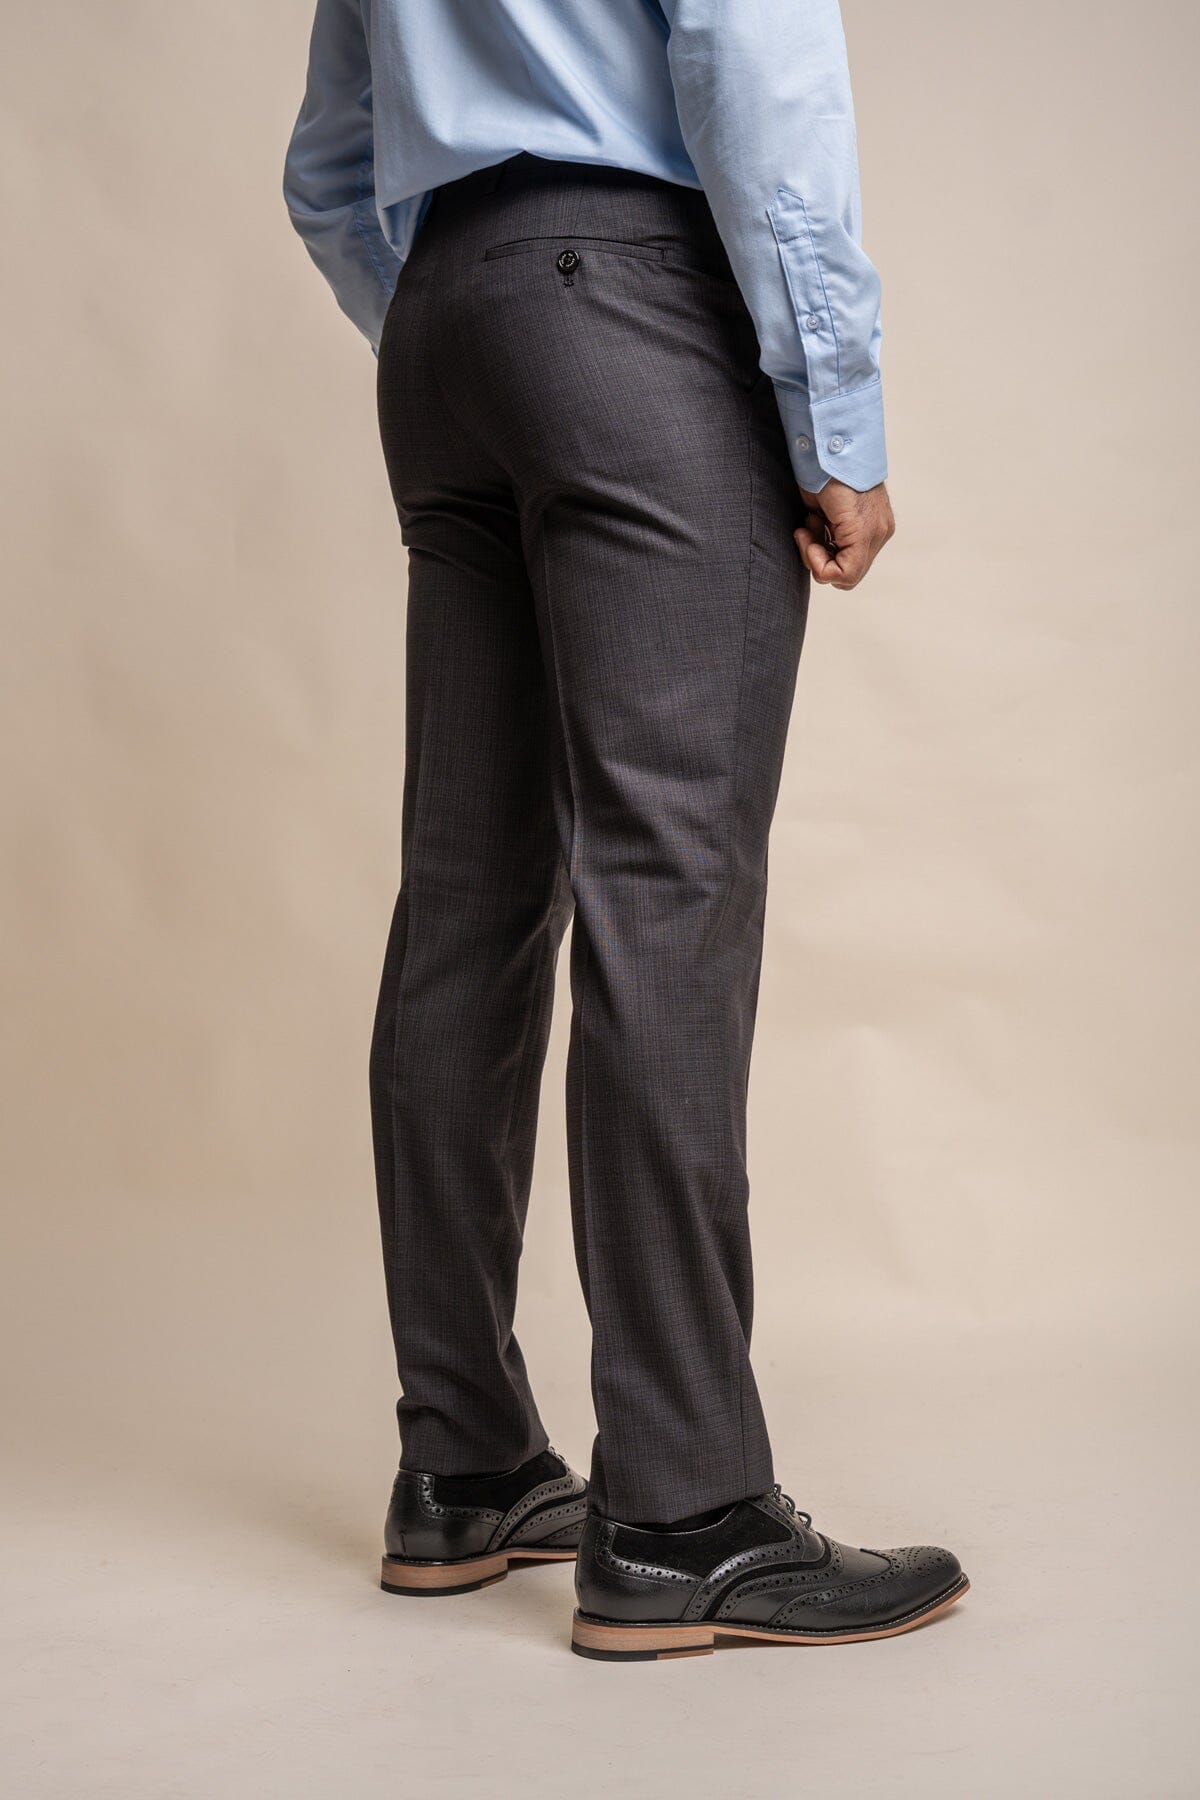 Graphite Check Trousers - STOCK CLEARANCE - Trousers Sale - 